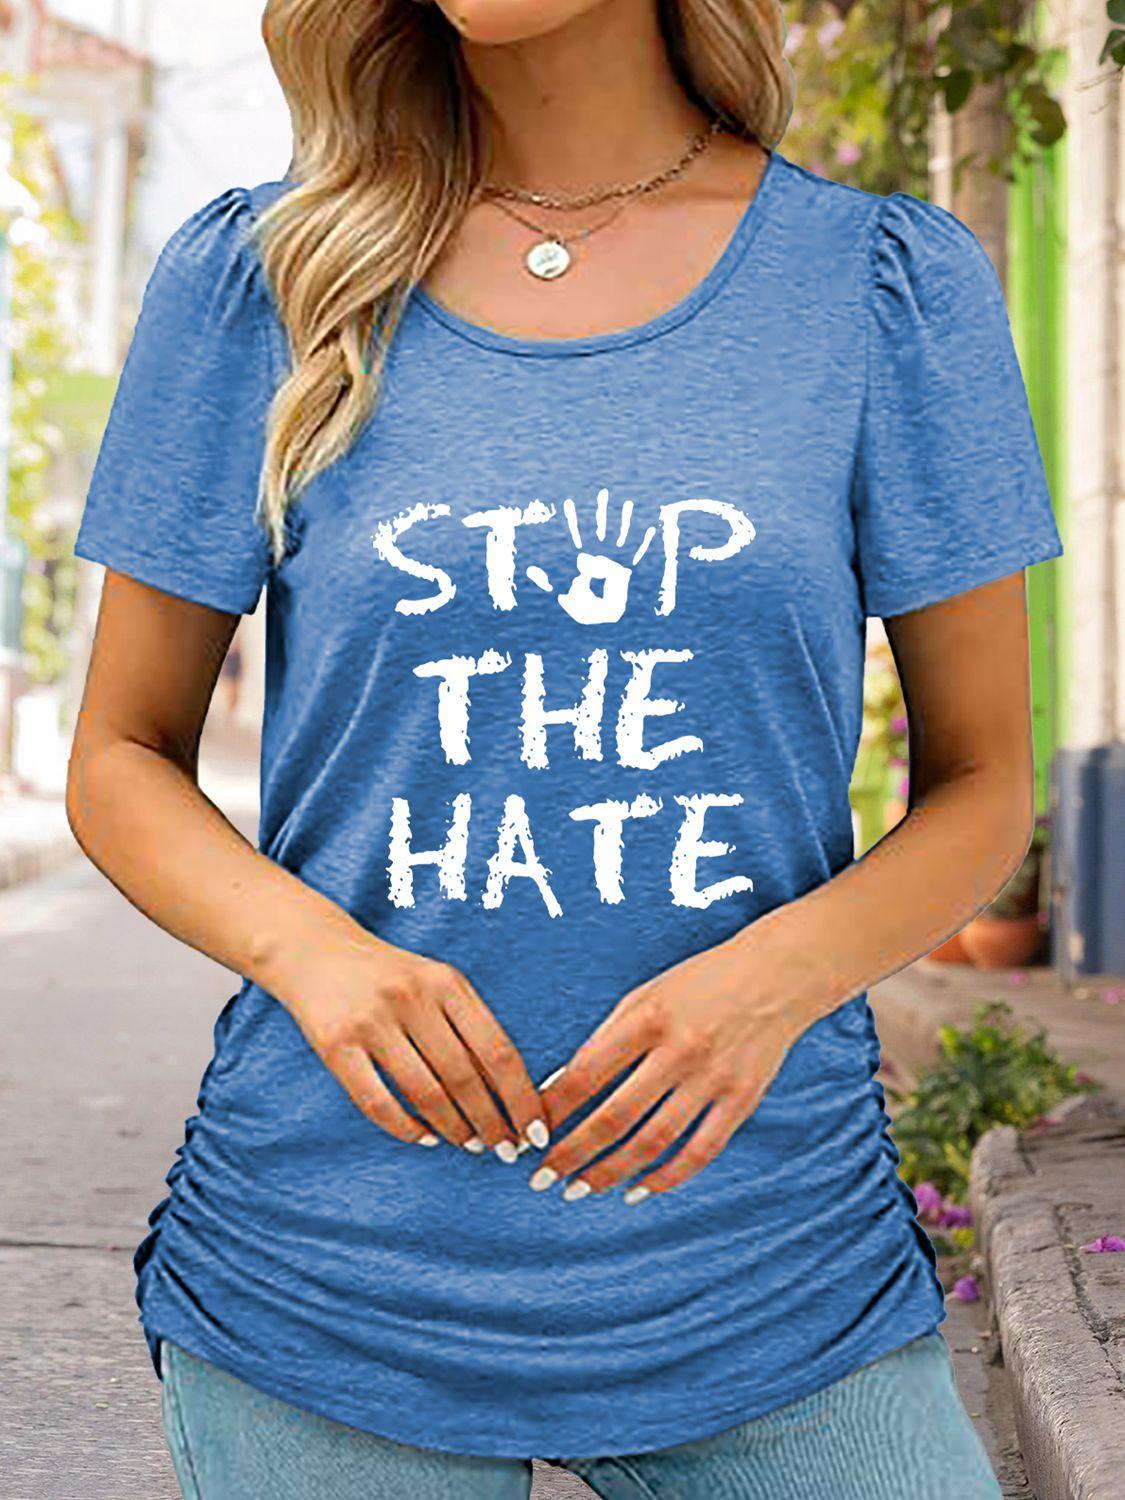 Round Neck Short Sleeve STOP THE HATE Graphic T-Shirt - Vesteeto